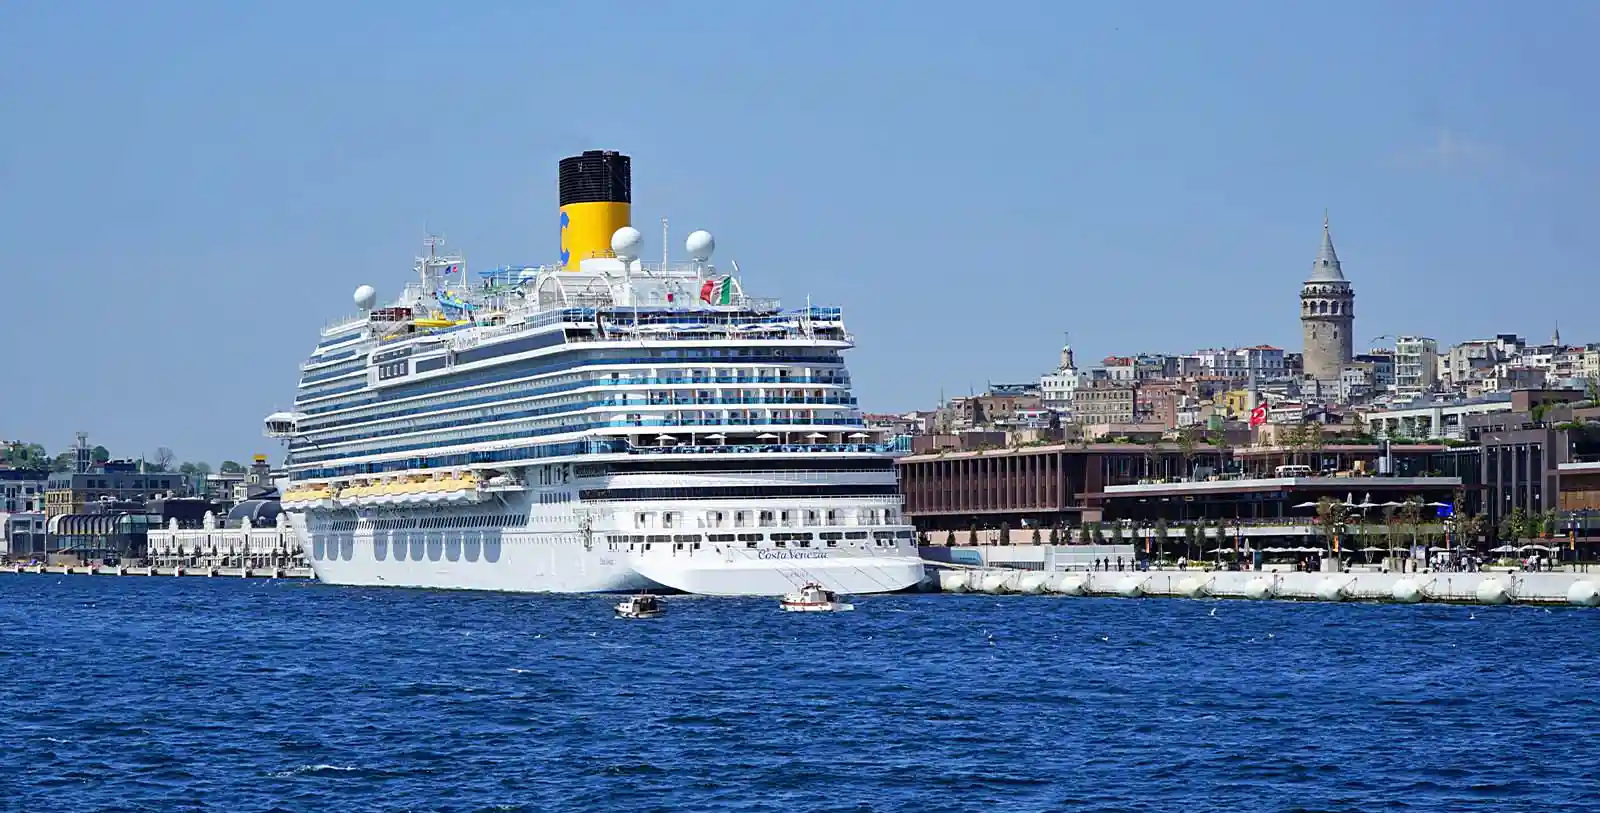 Istanbul is reachable from sea: a cruise ship is boarding passengers from Galata Port in Istanbul.